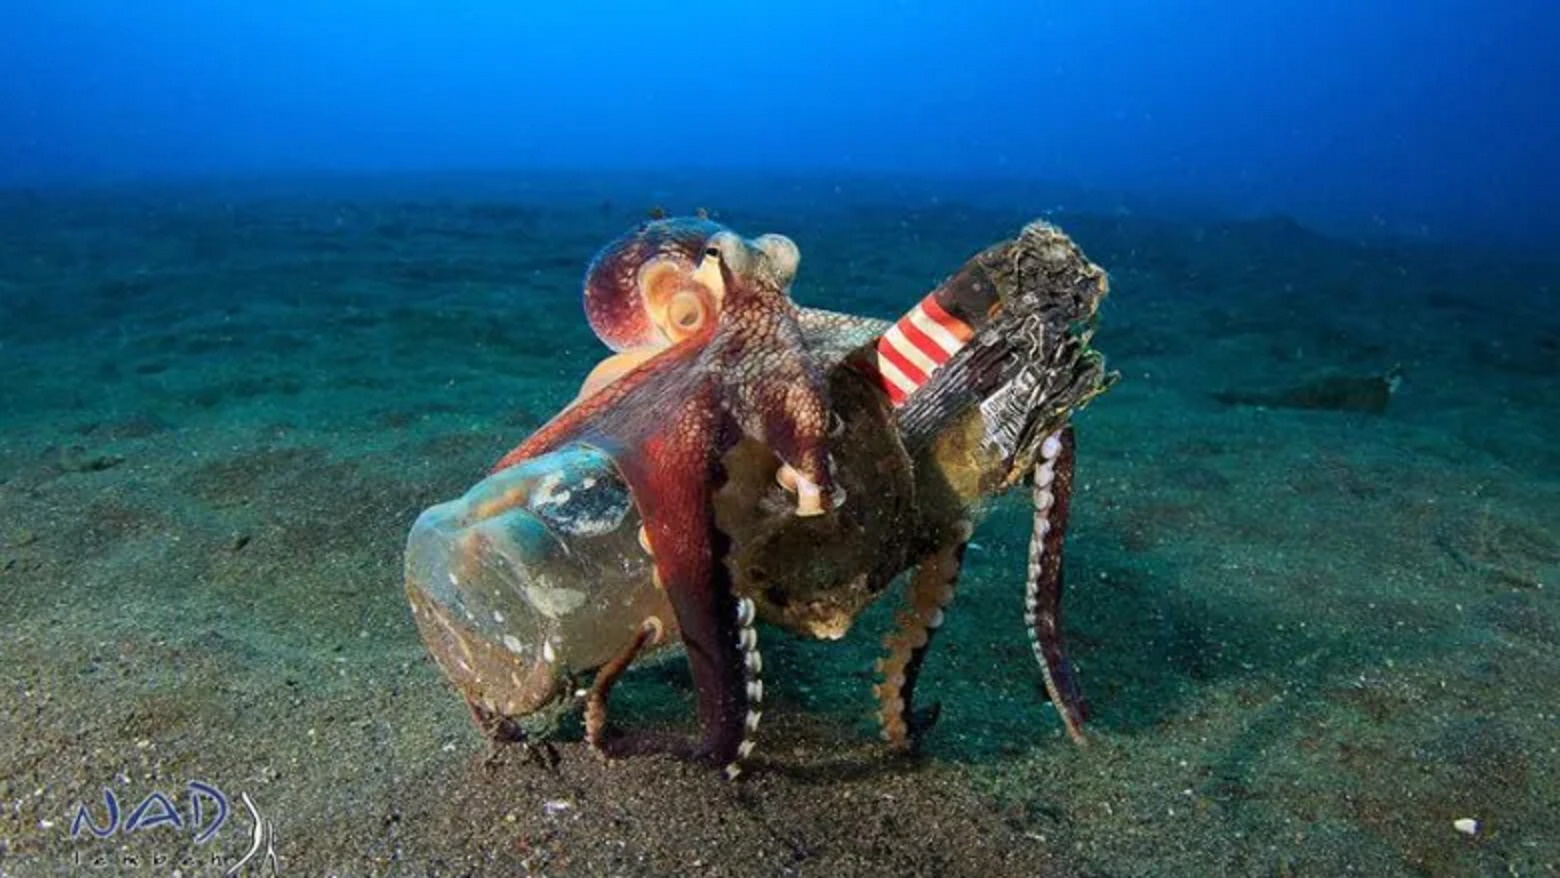 An octopus is pictured “stilt-walking” with a variety of collected trash. A new study crowdsourced hundreds of images, including this one, that observed octopuses using human garbage for a variety of tasks. Photo: Serge Abourjeily